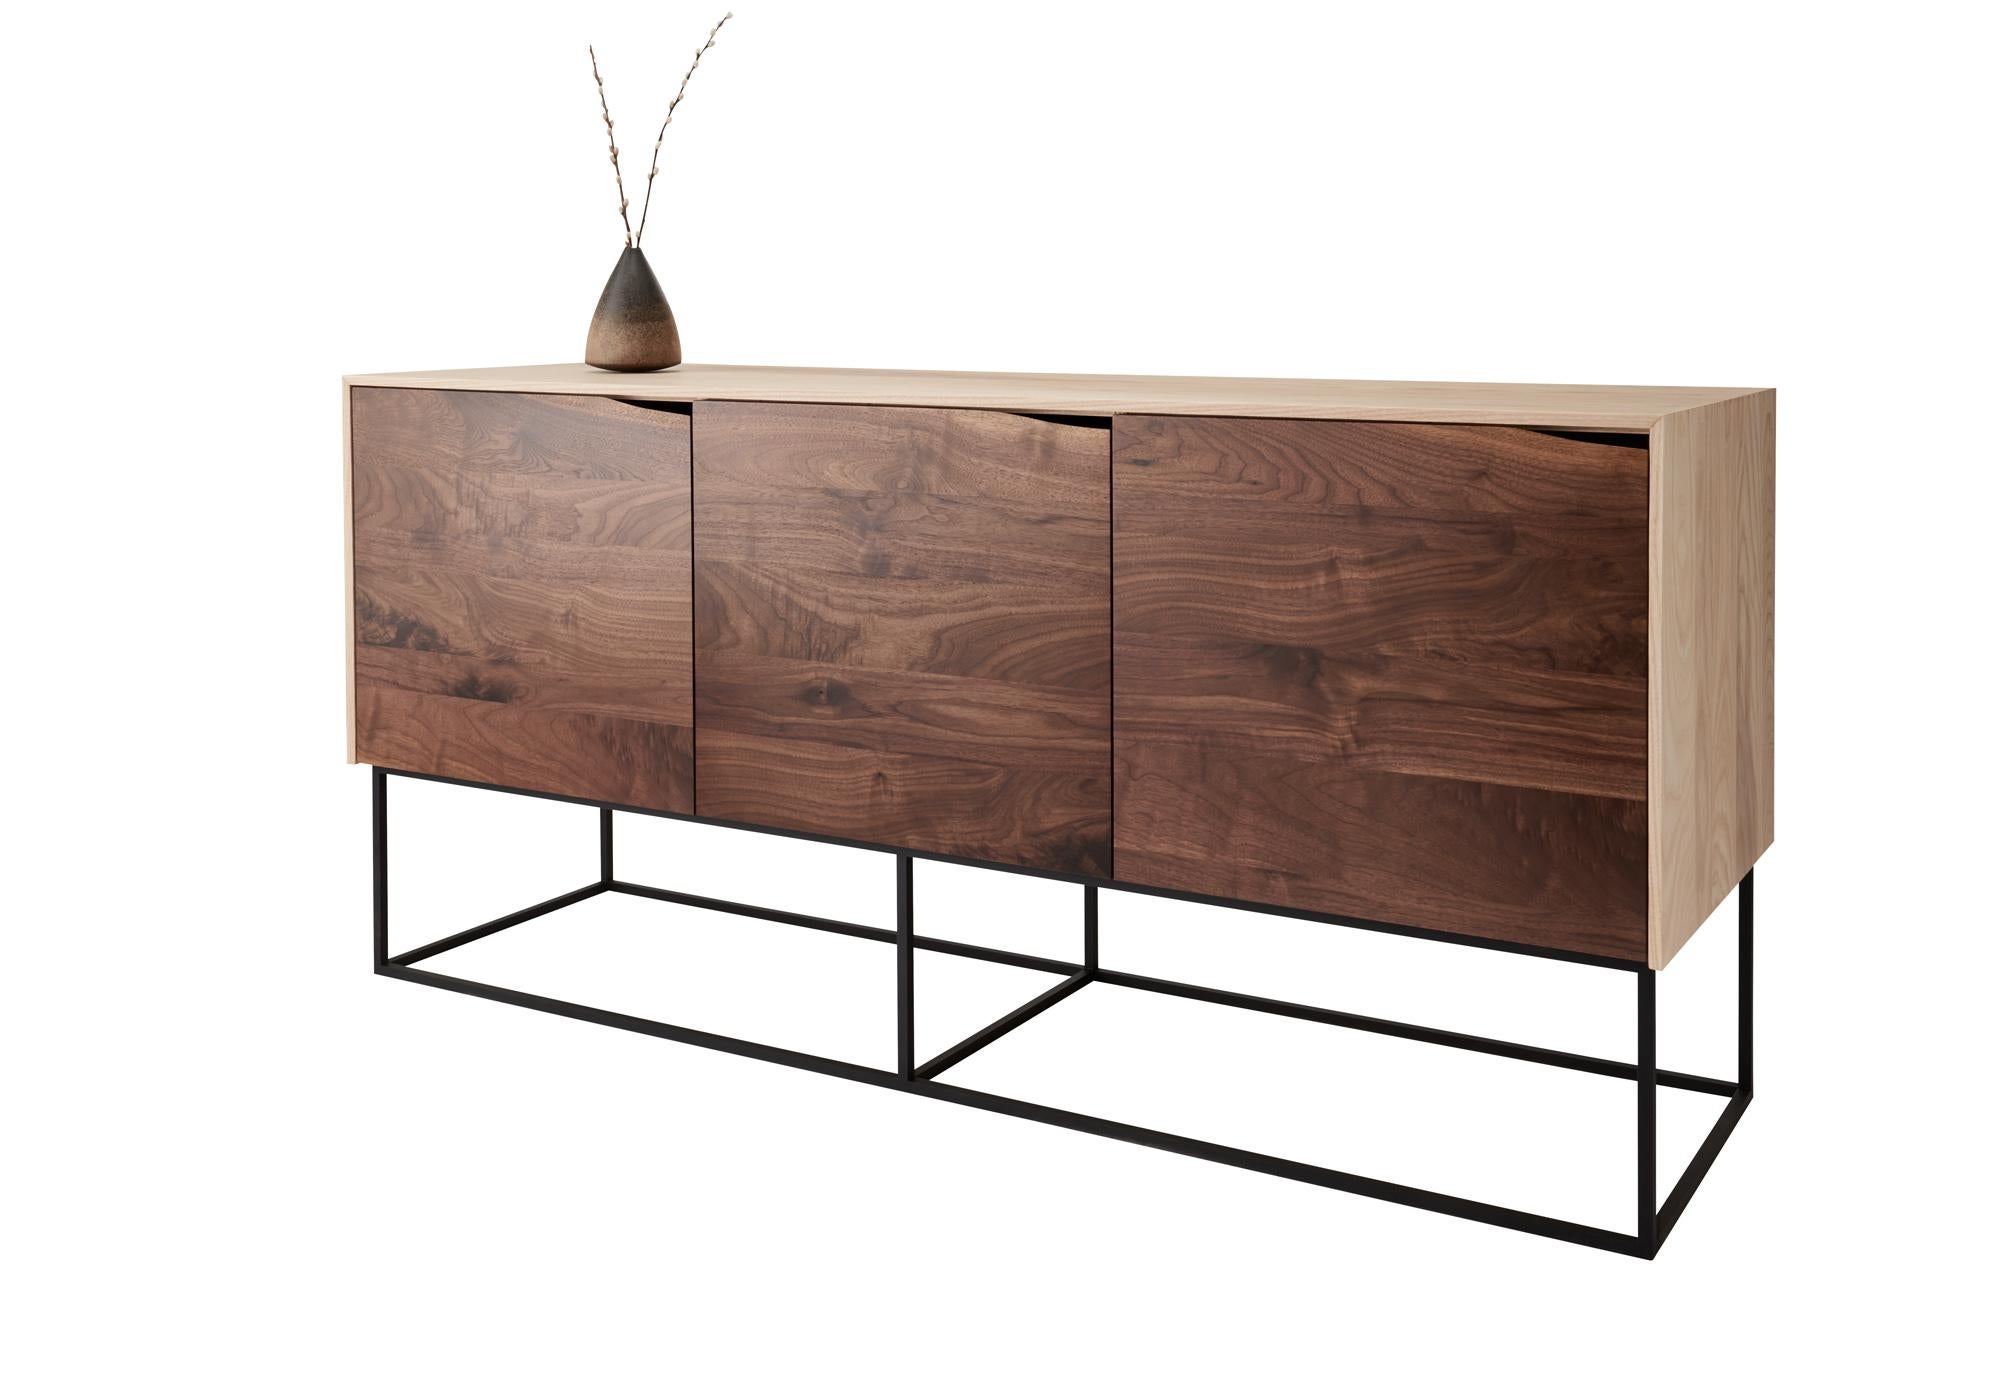 Handcrafted Classic modern credenza of natural ash and walnut with a cold-rolled steel base. The ash cabinet is coated with a no-VOC oil and wax finish leaving the wood with a raw look. The soft-close walnut doors are constructed from handcut veneer